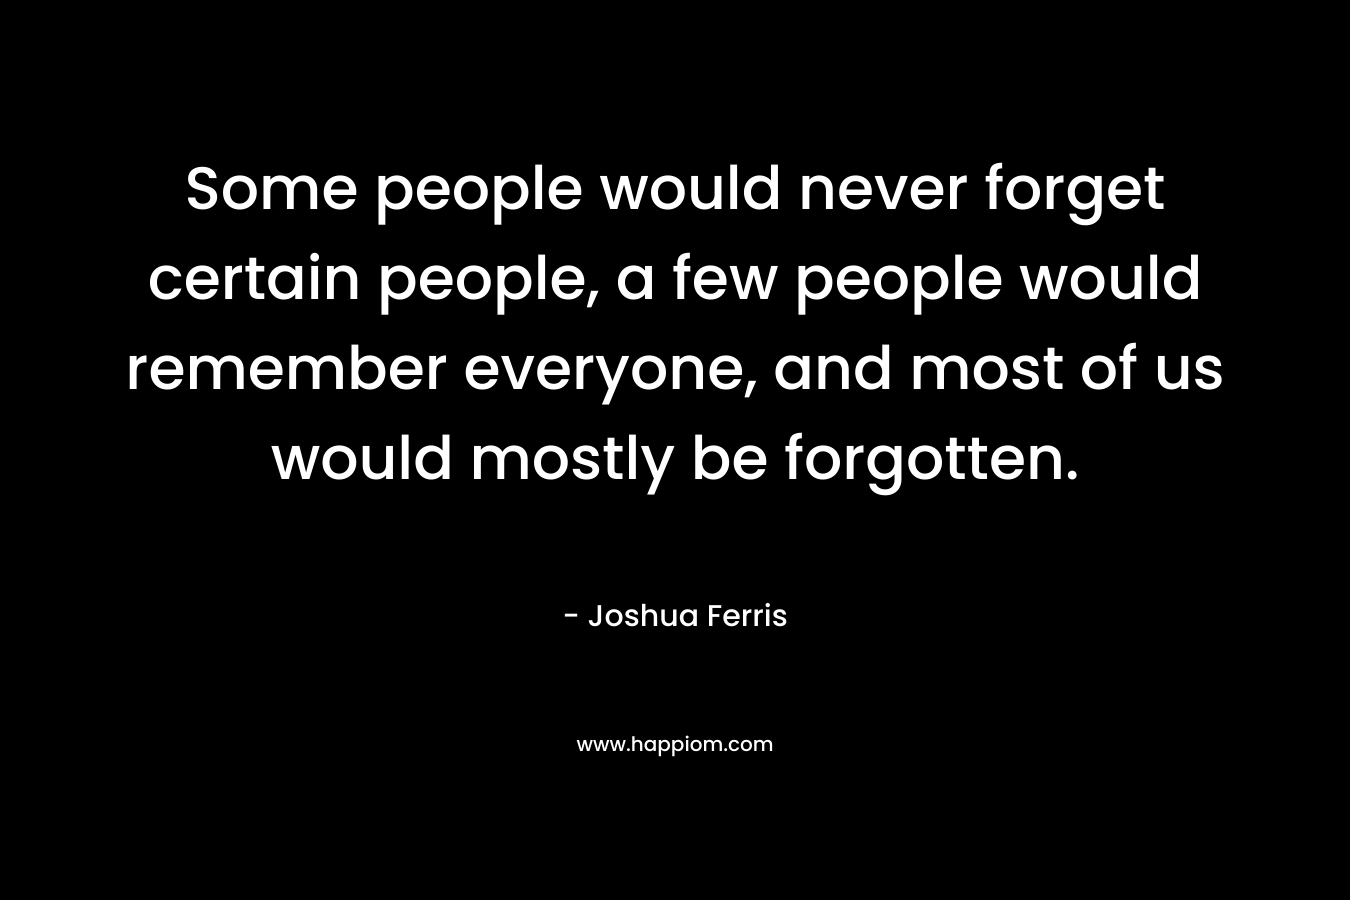 Some people would never forget certain people, a few people would remember everyone, and most of us would mostly be forgotten.